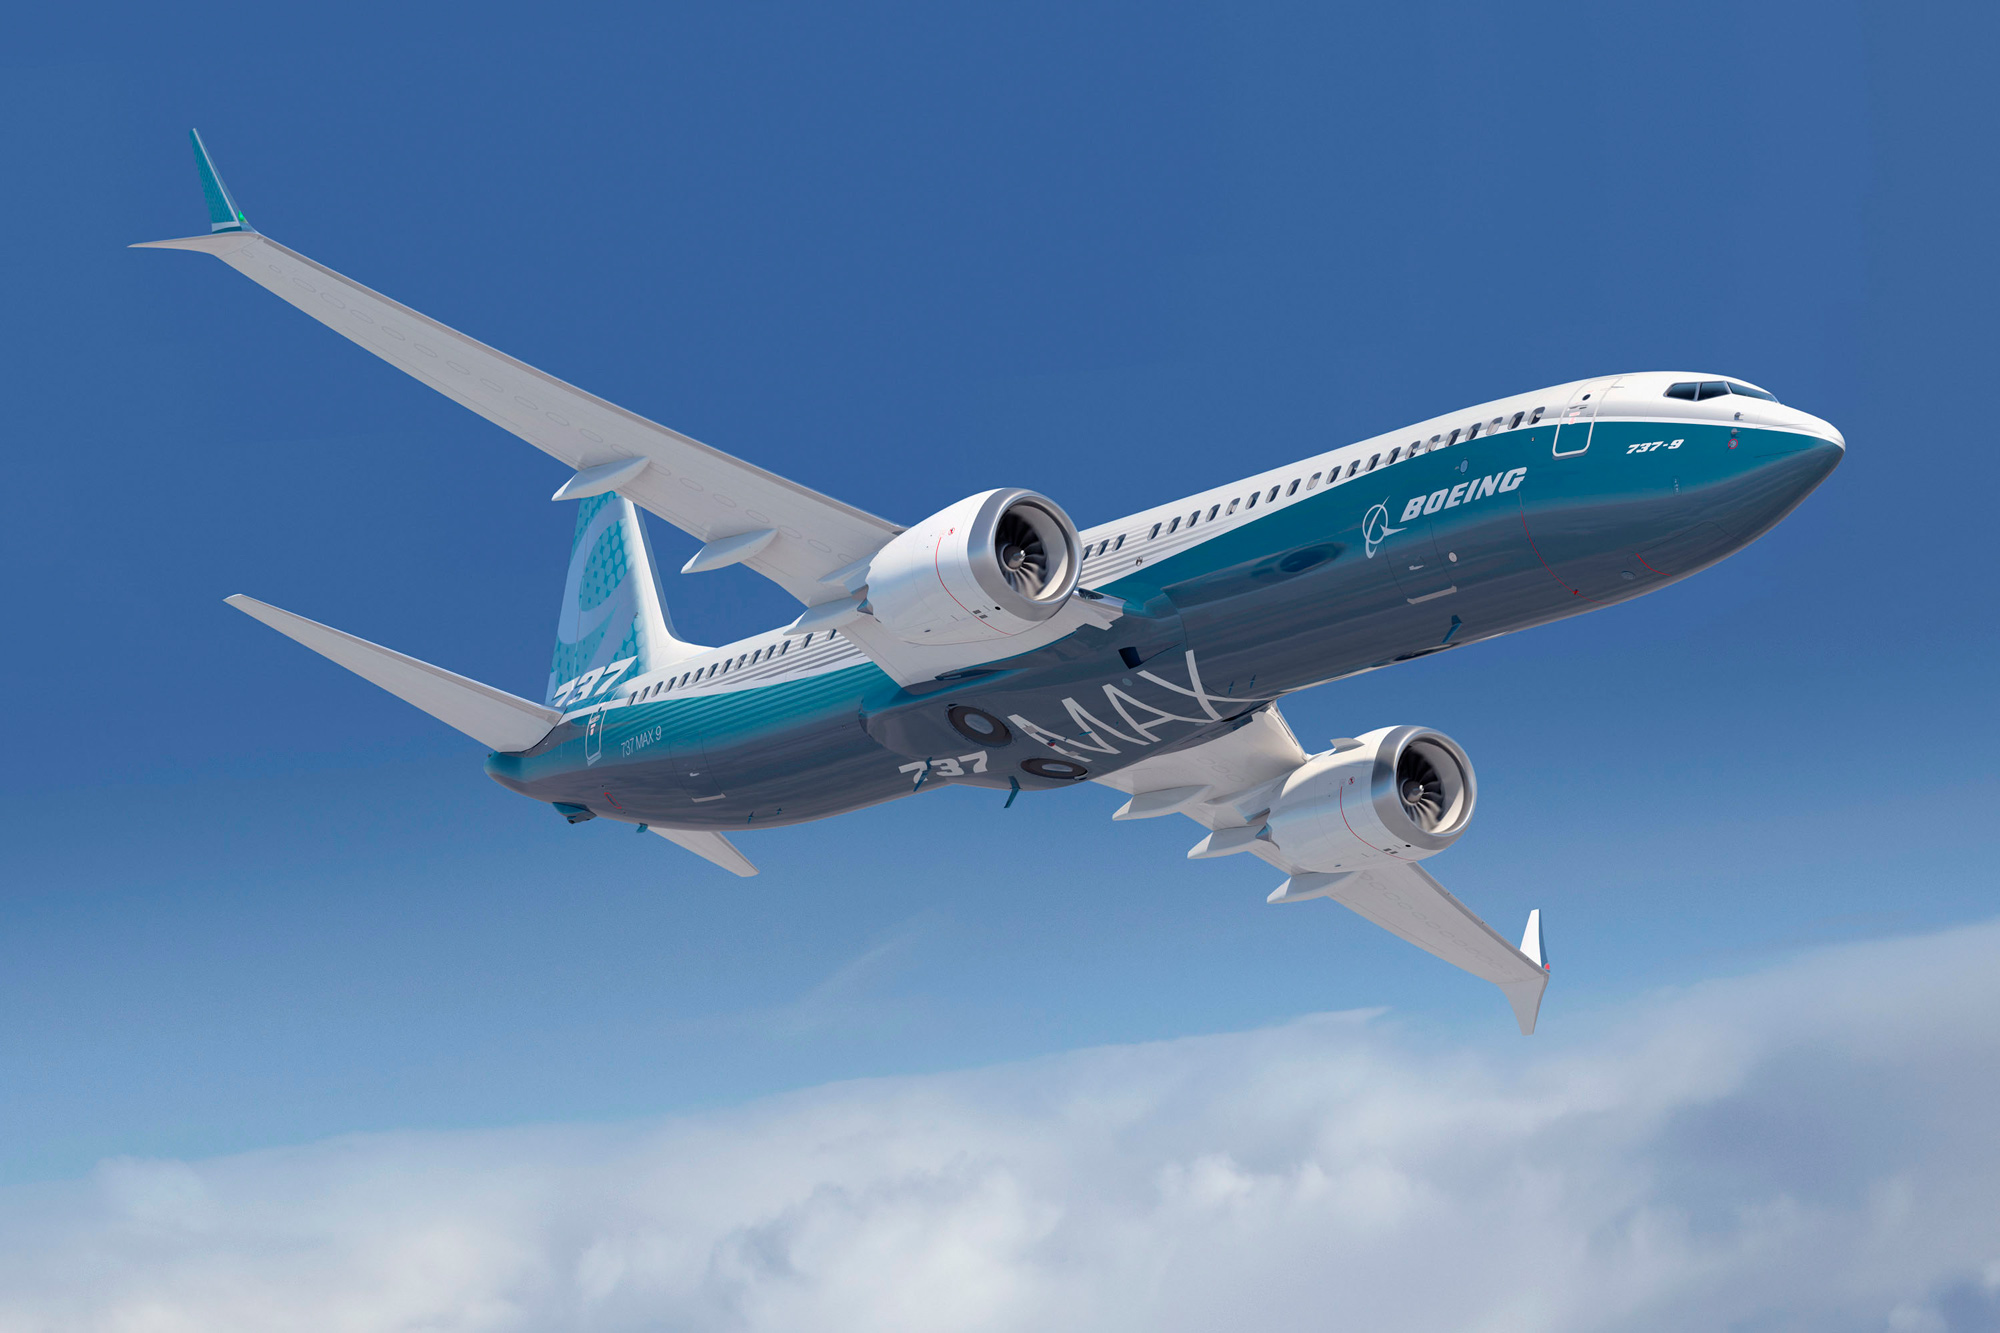 Vmo Aircraft Leasing Completes Sale and Leaseback Boeing 737 MAX 8 Transaction